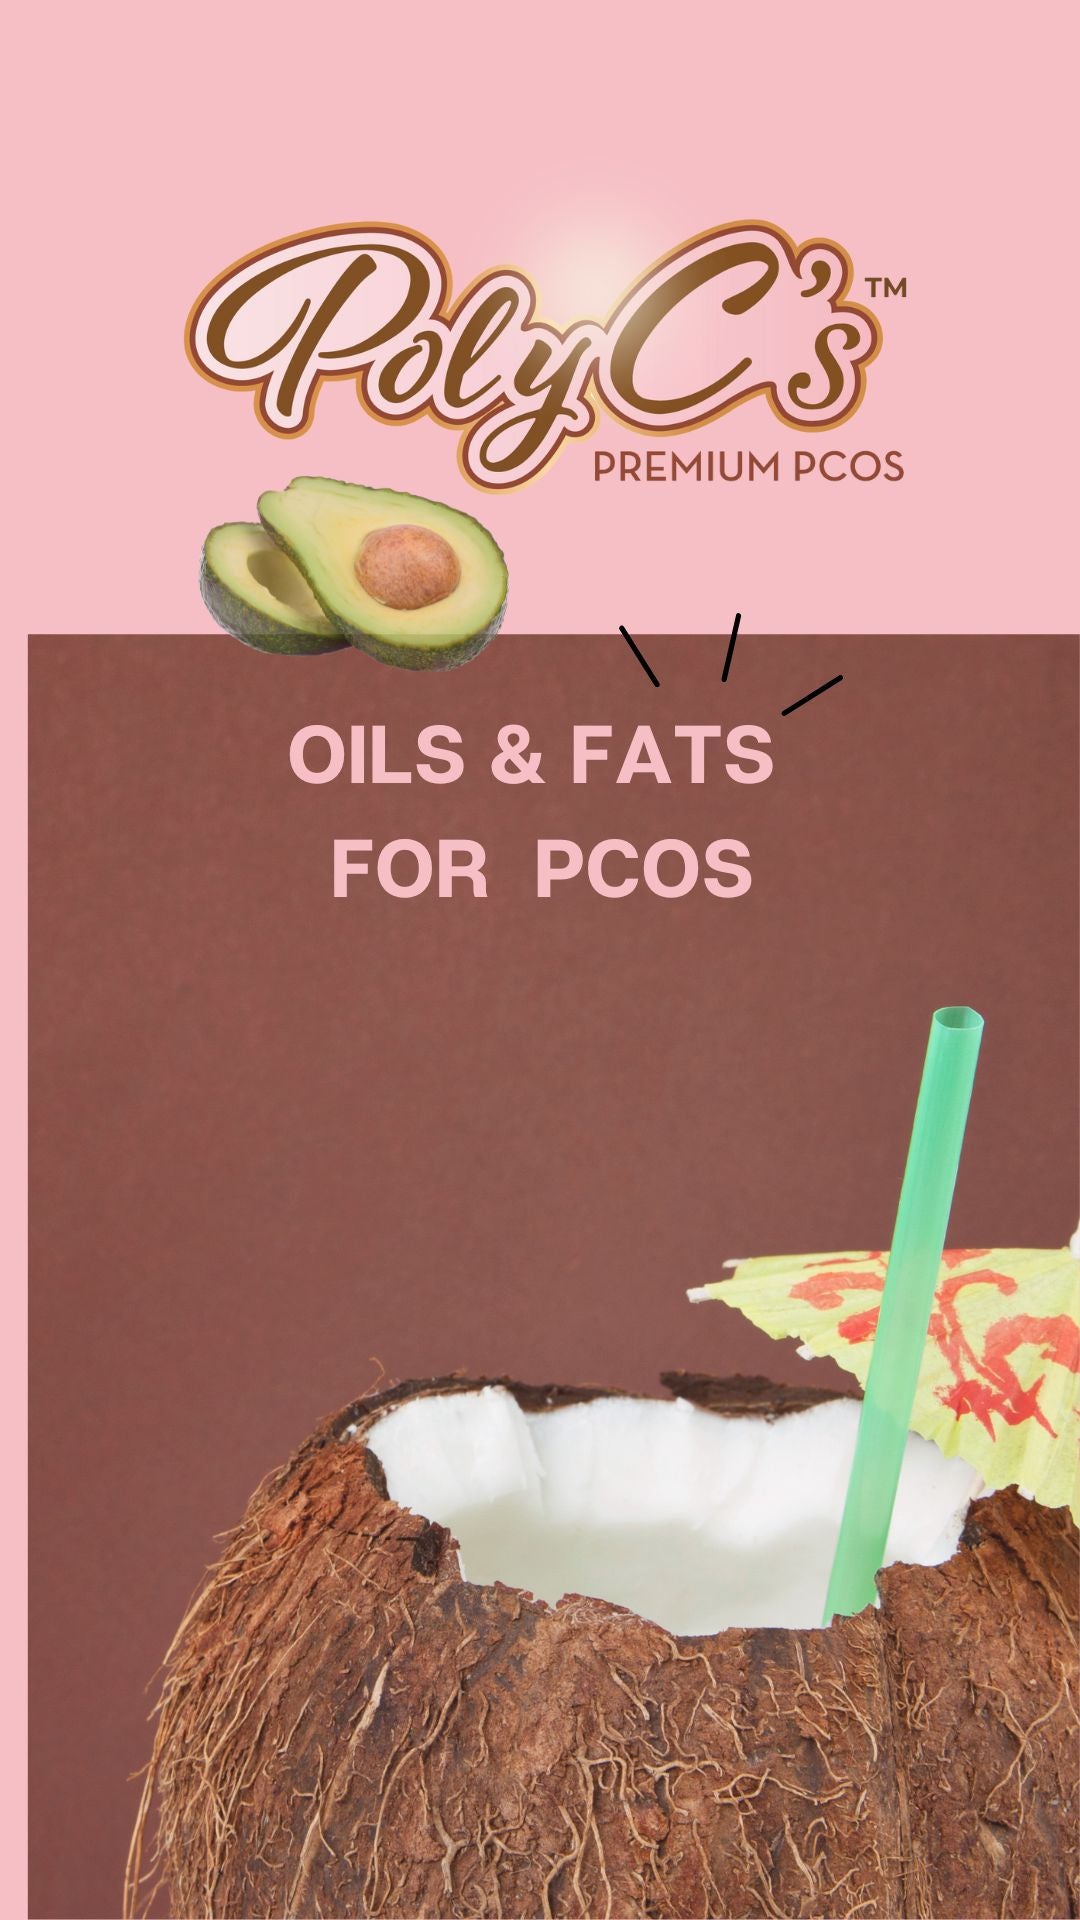 Best Oil & Fats for PCOS